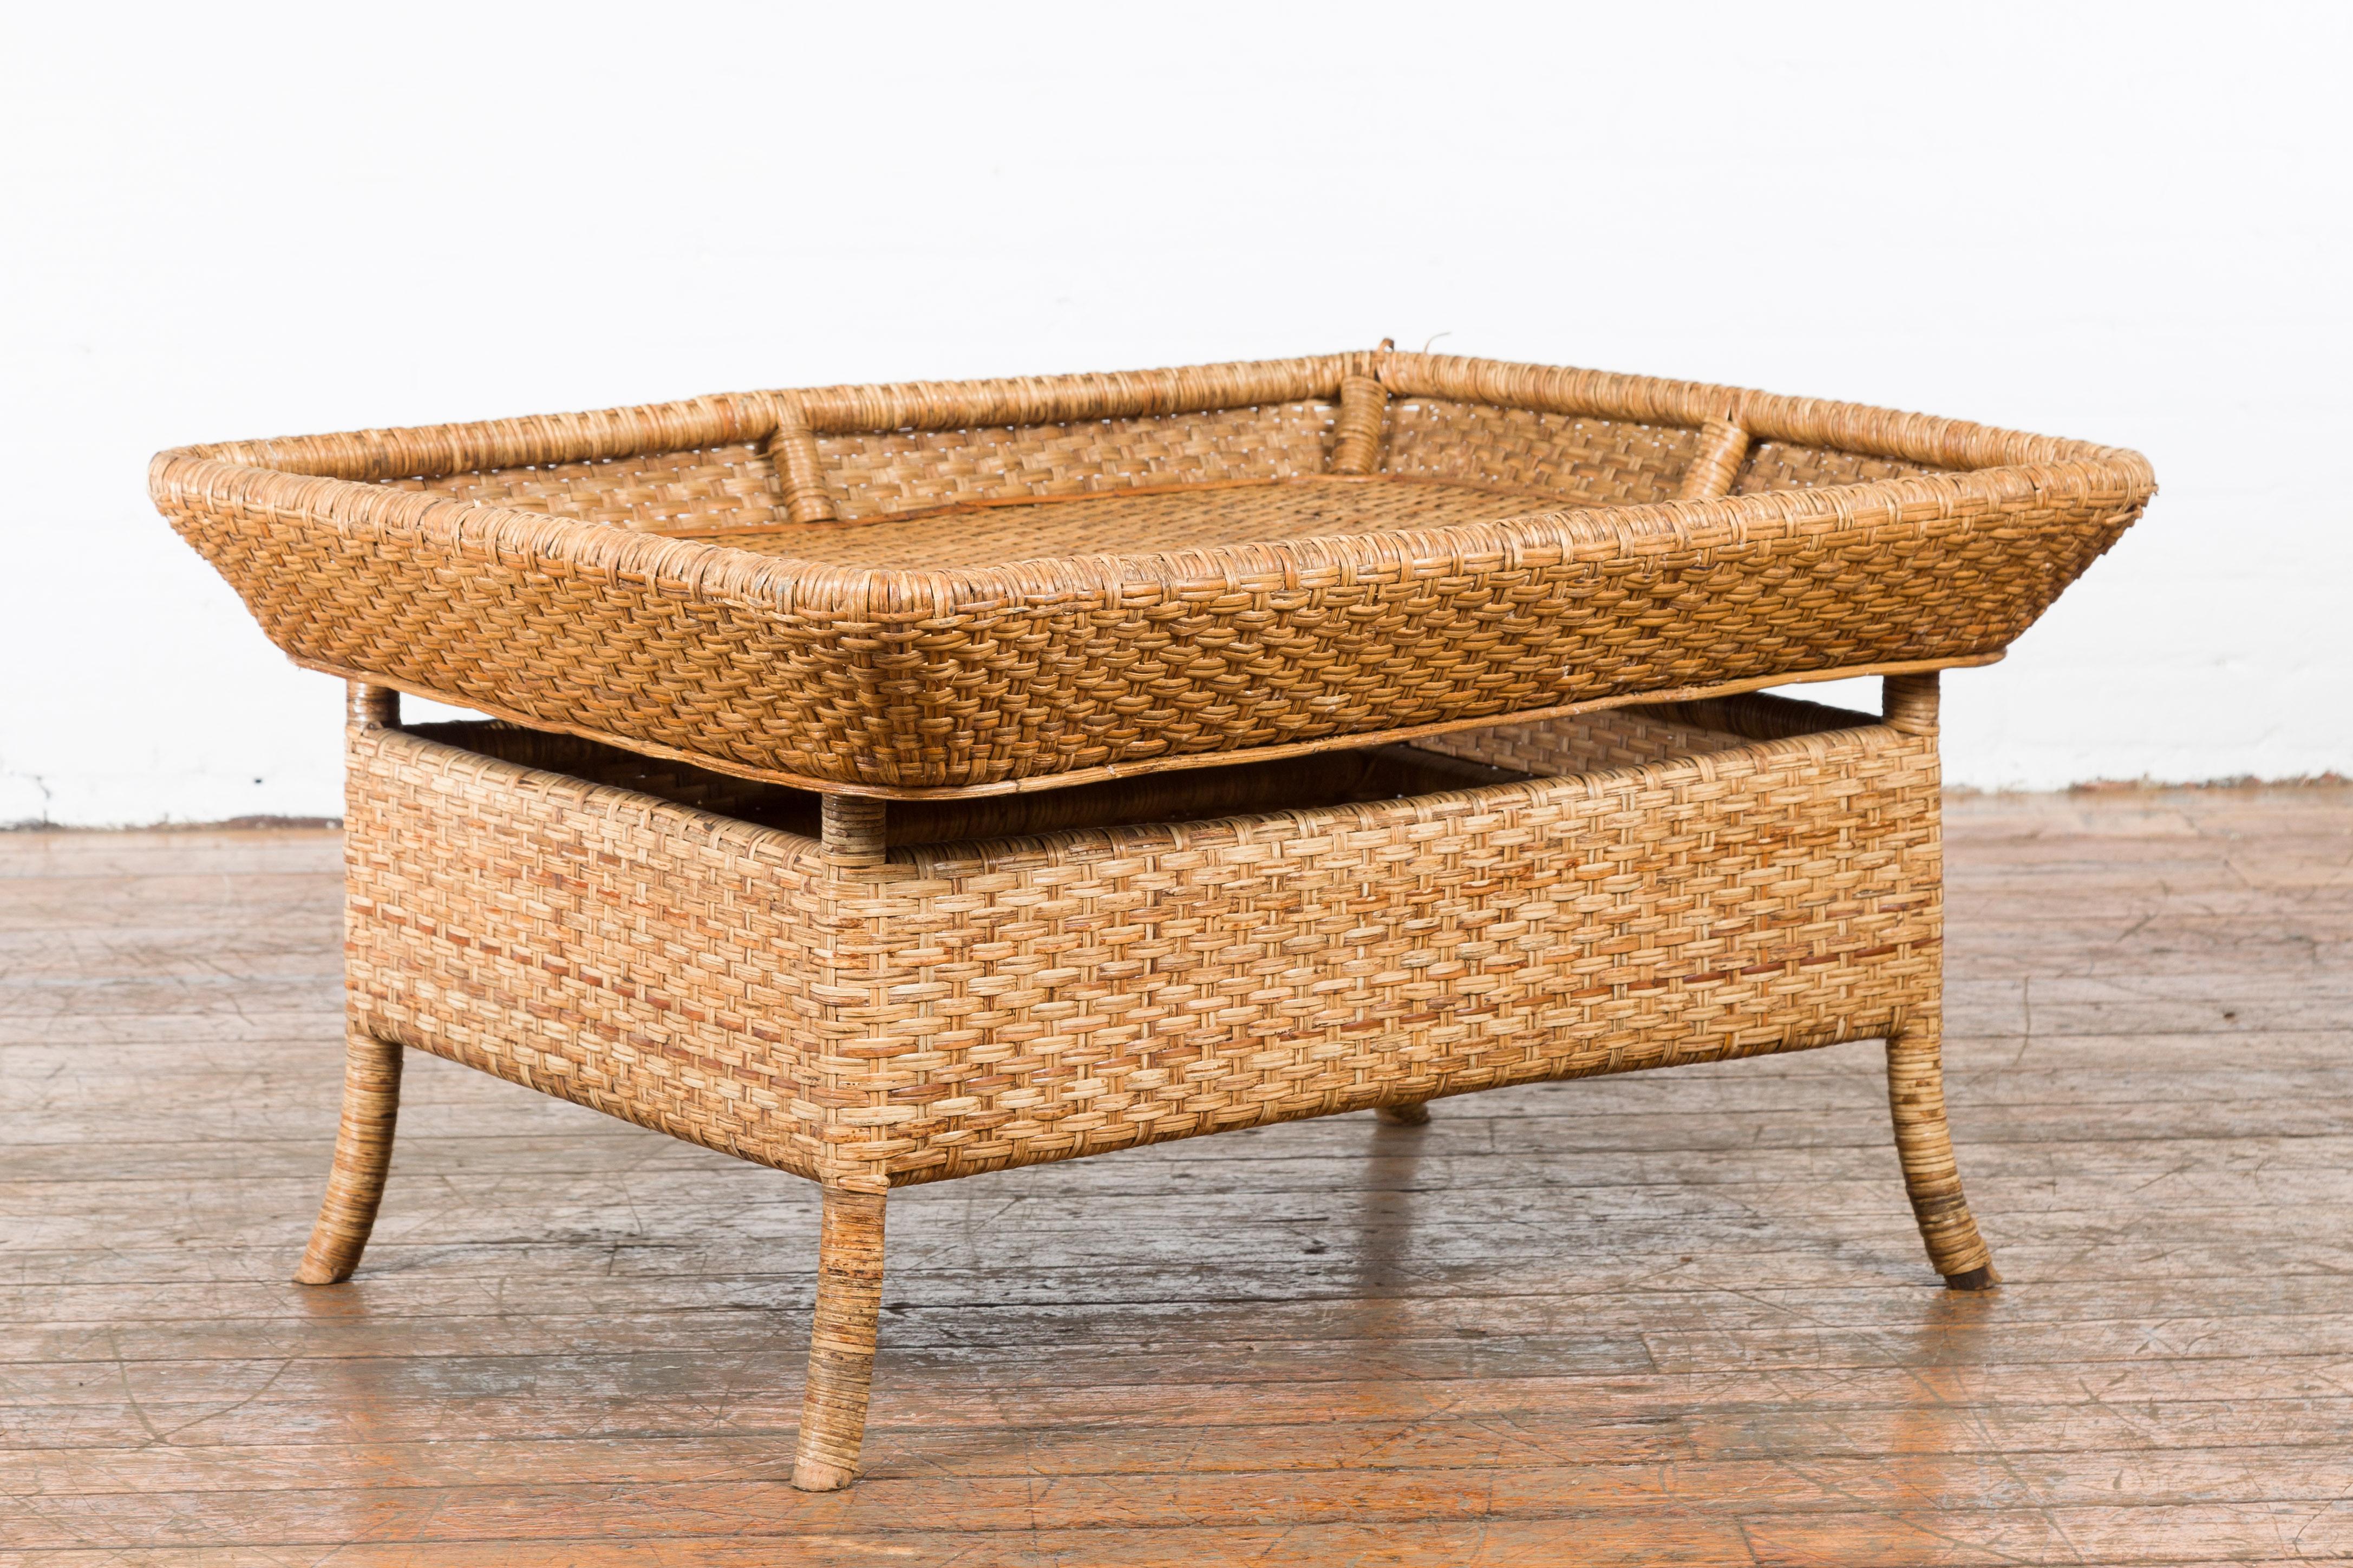 A Burmese rattan and bamboo vintage coffee table from the mid 20th century with a spacious squared open tray top. Created in Burma during the mid century, our vintage coffee table features a beautiful display of rattan and bamboo artistry that adds